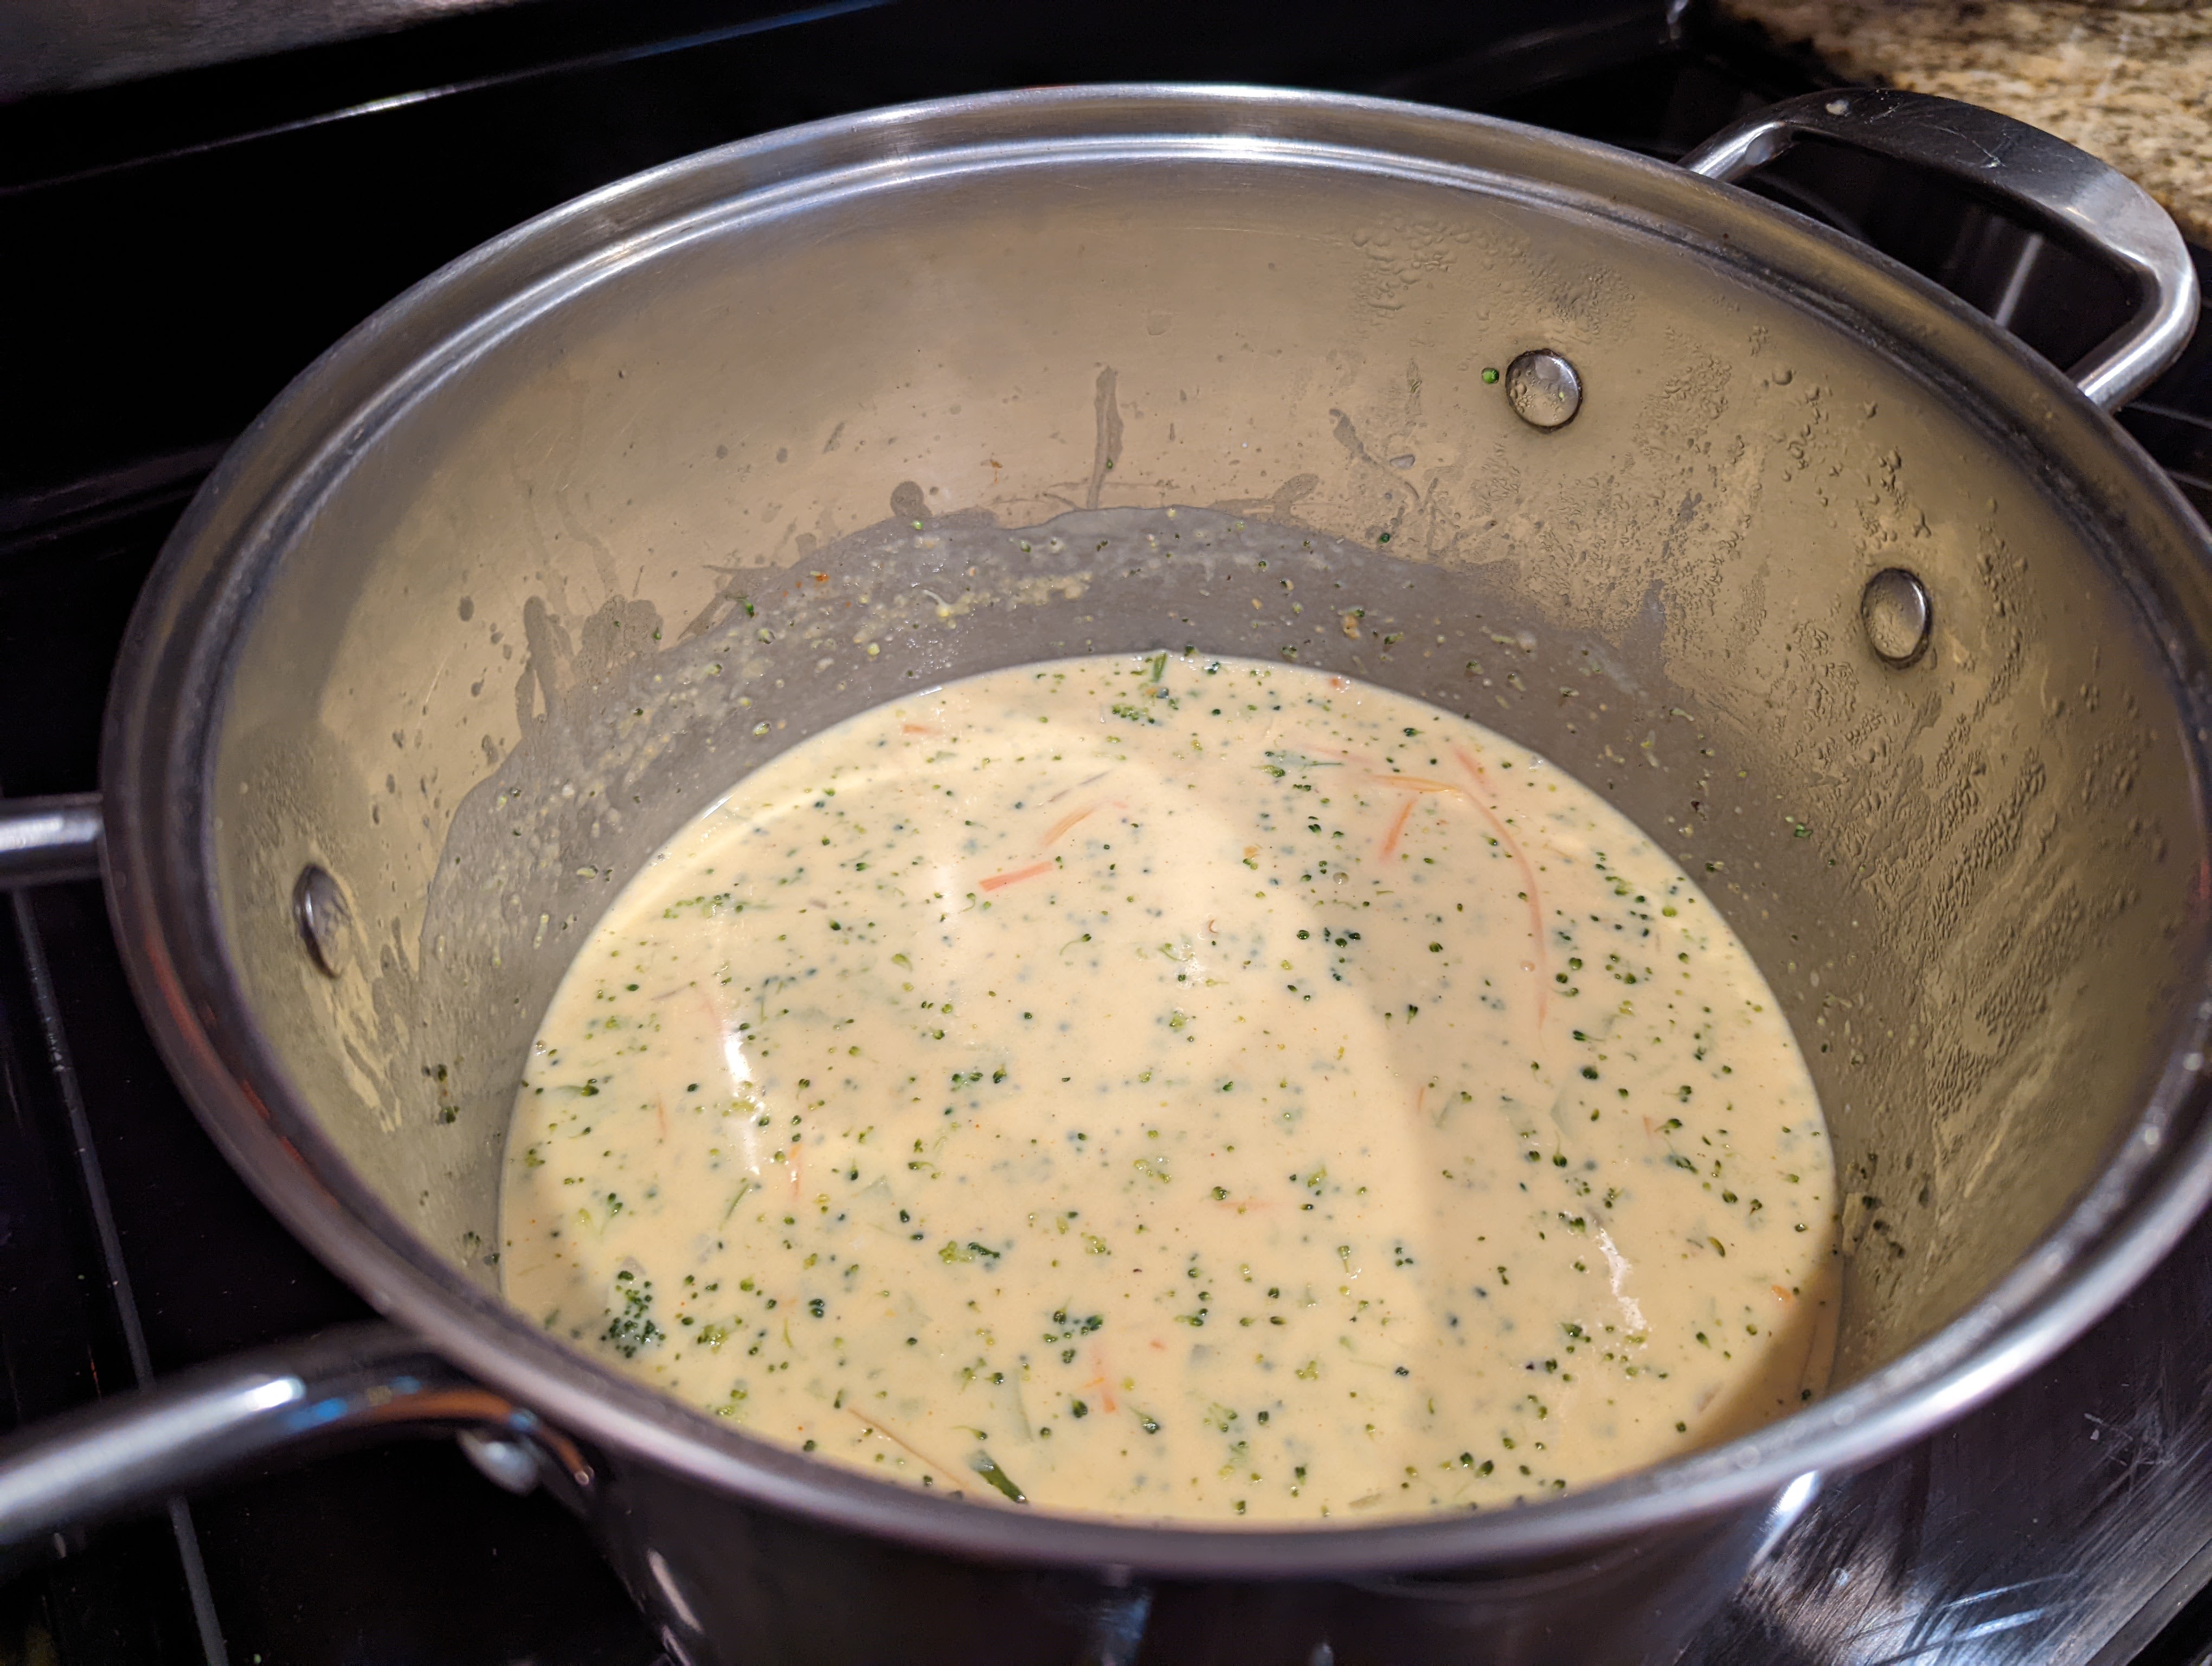 Healthy-ish Broccoli Cheddar Cheese Soup cooking away